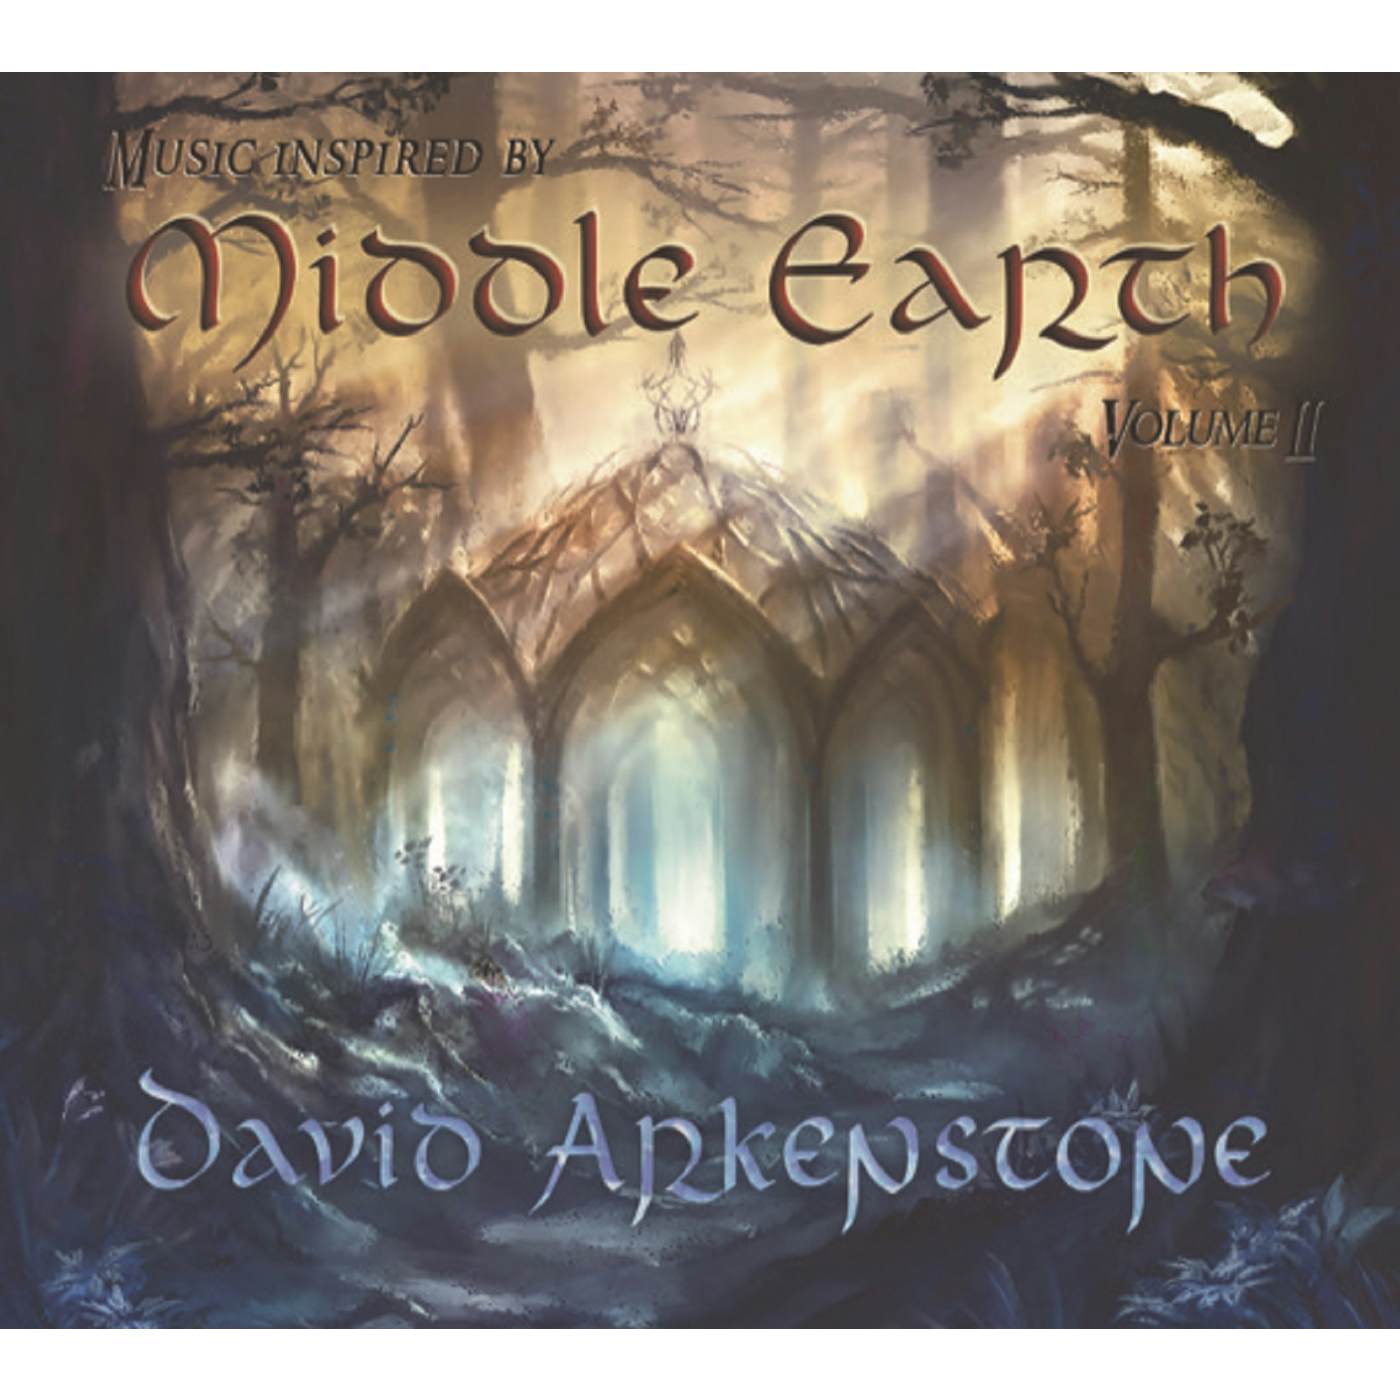 David Arkenstone Music Inspired By Middle Earth Vol. Ii CD